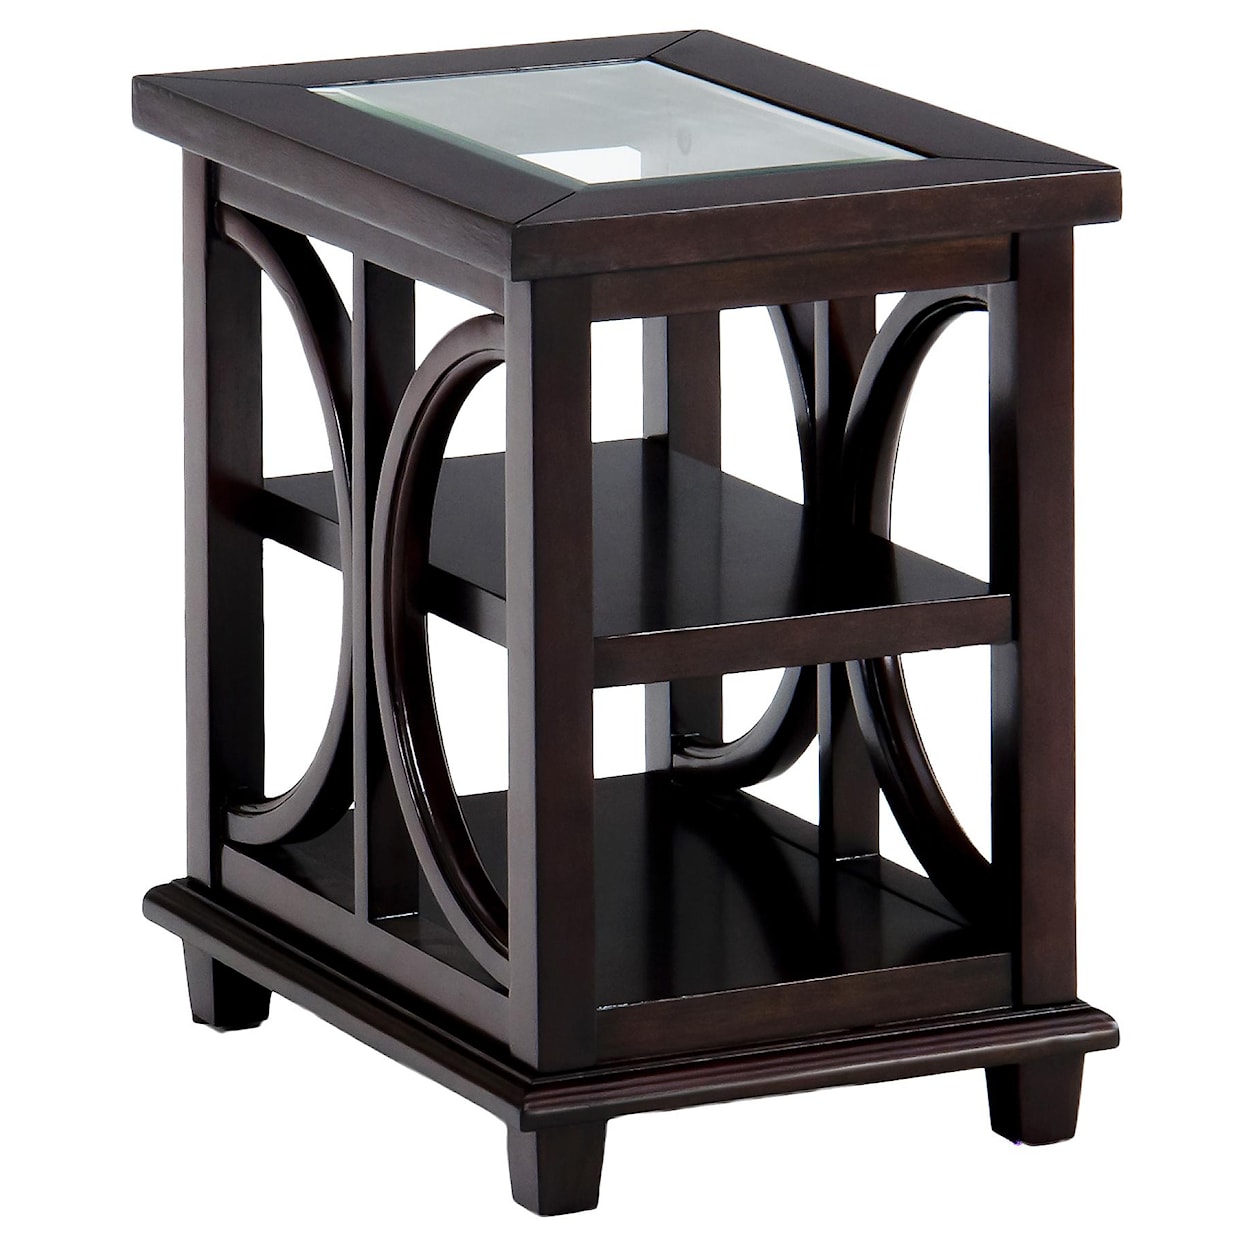 VFM Signature Panama Brown Chairside Table w/ Glass Top